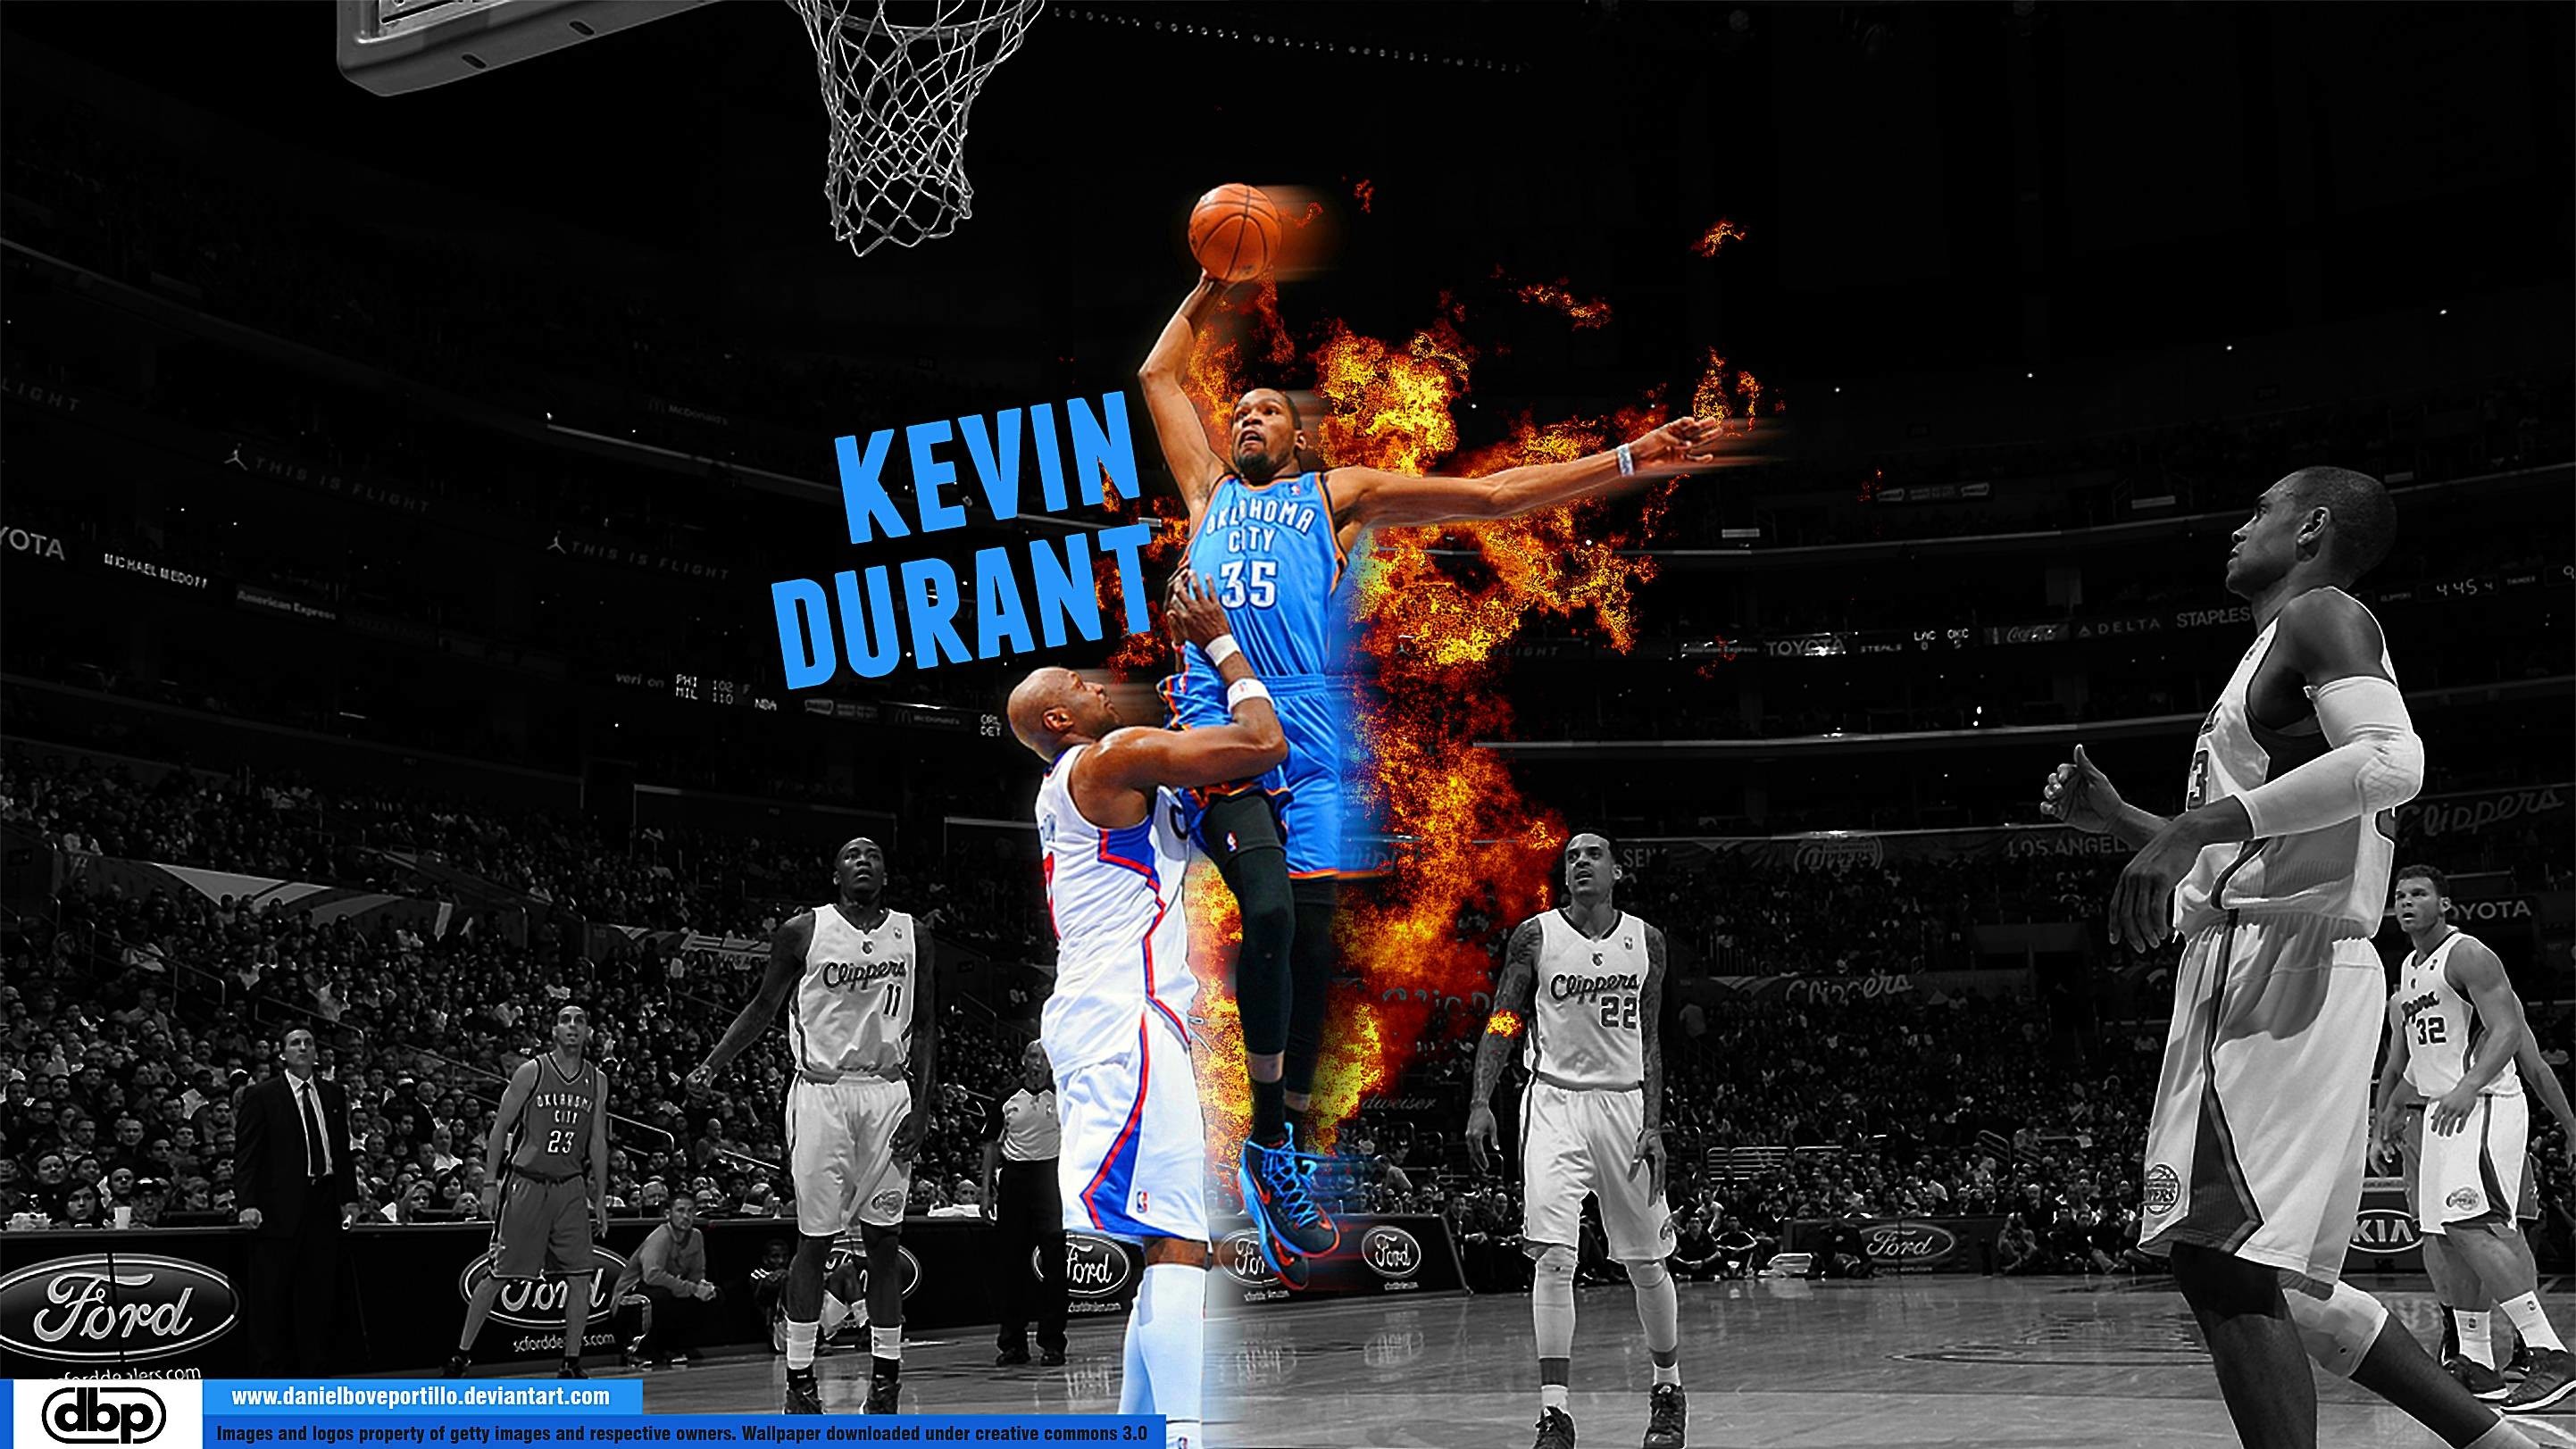 Kevin Durant Wallpapers HD Wallpaper